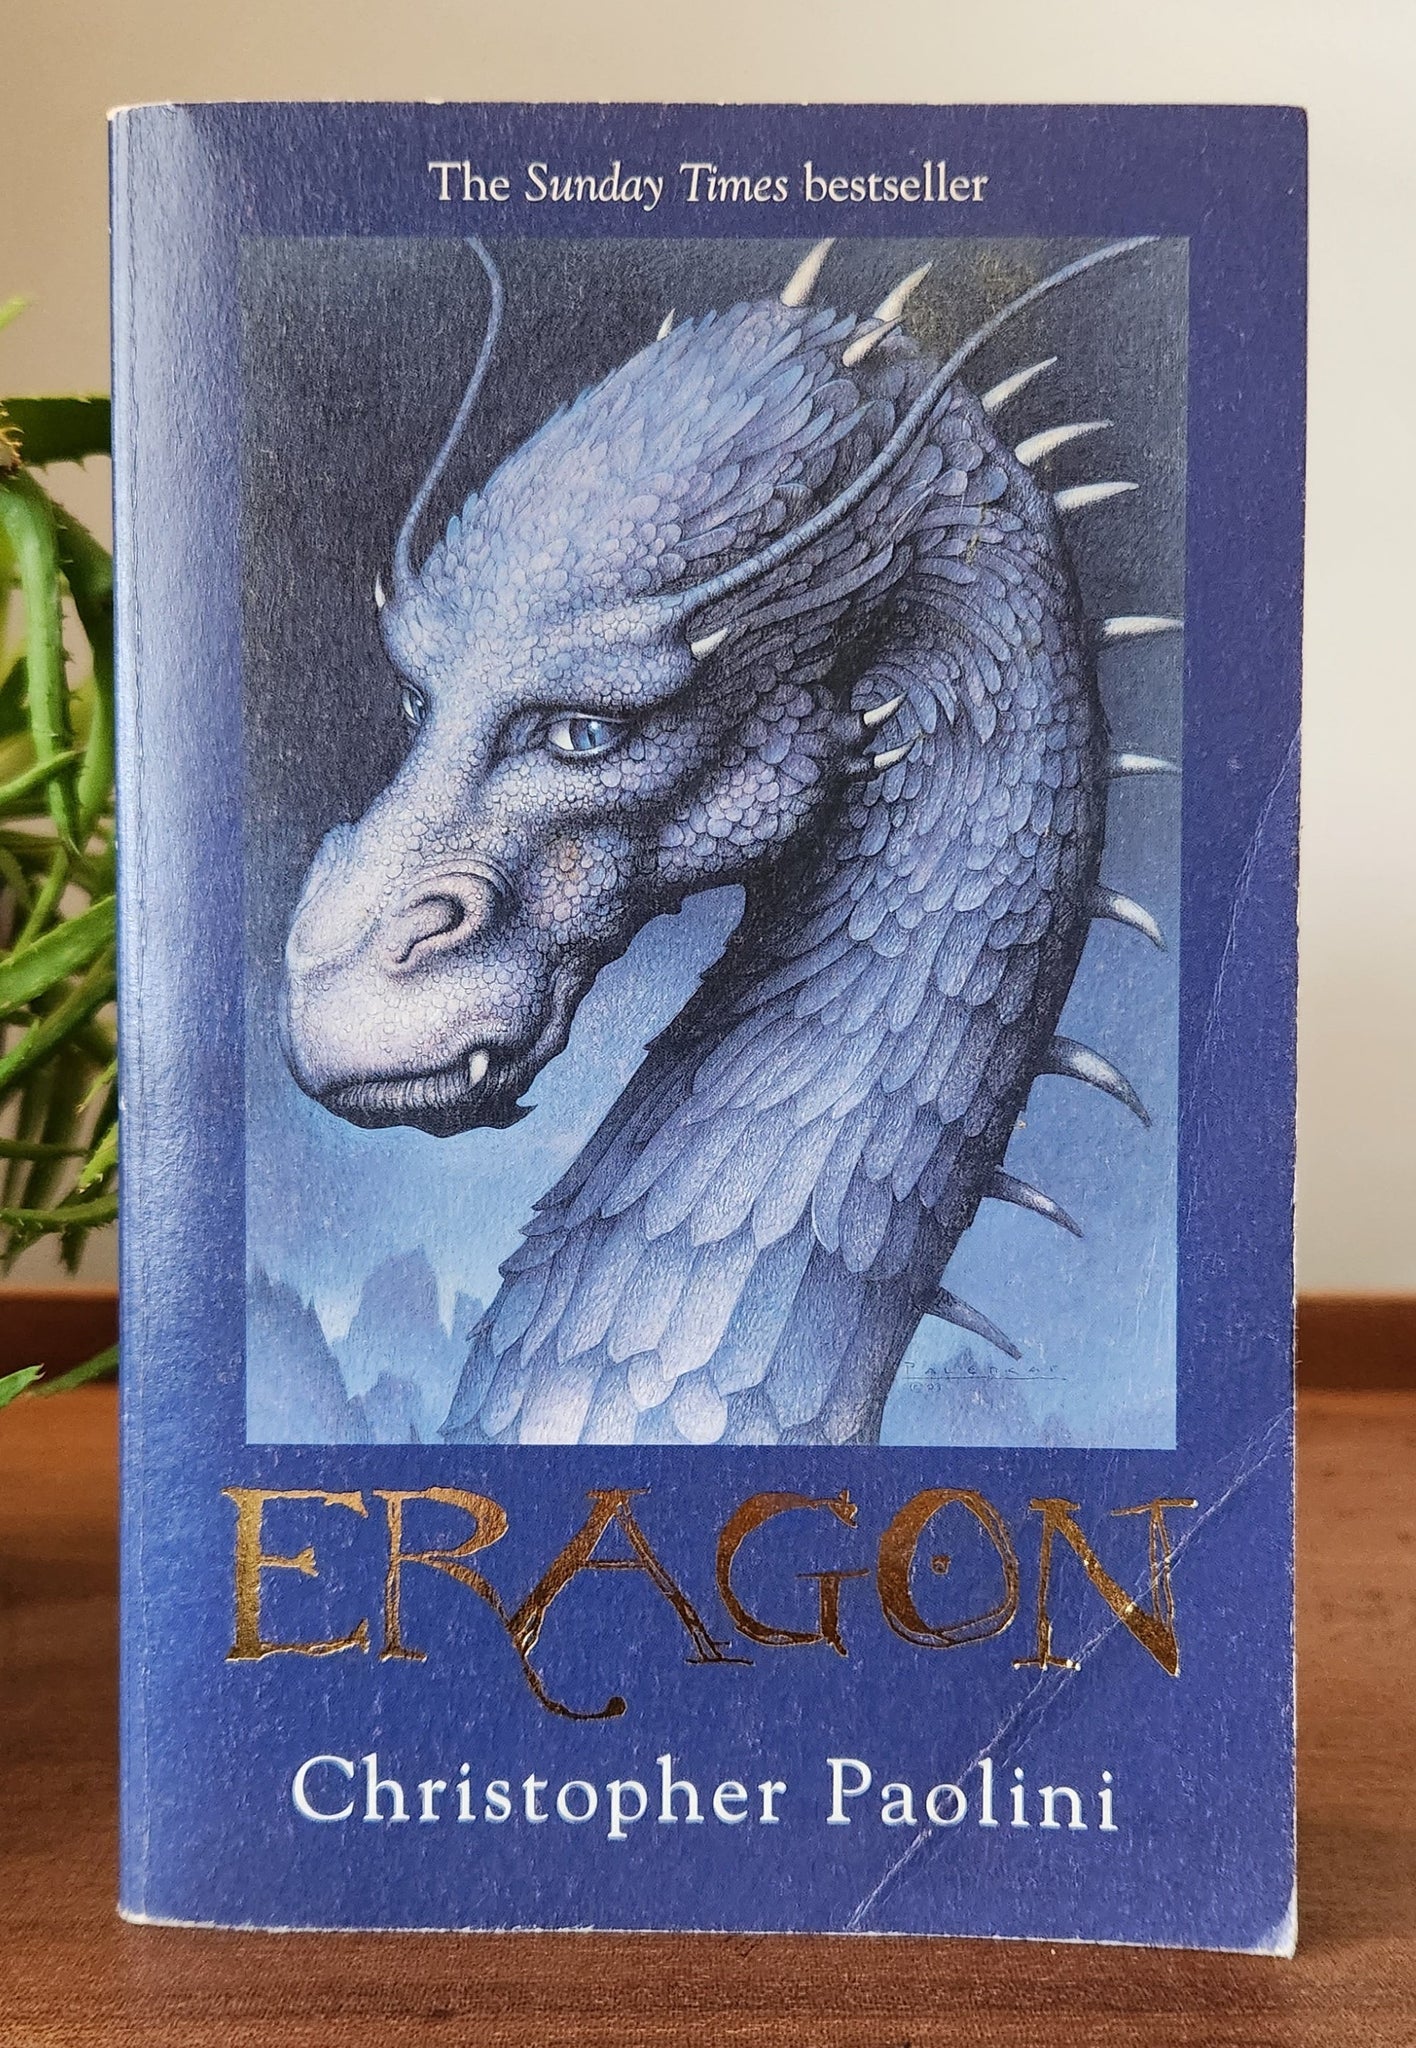 Inheritance　Paolini　House　–　by　1:　Cycle　Green　Book　Eragon　Christopher　Books